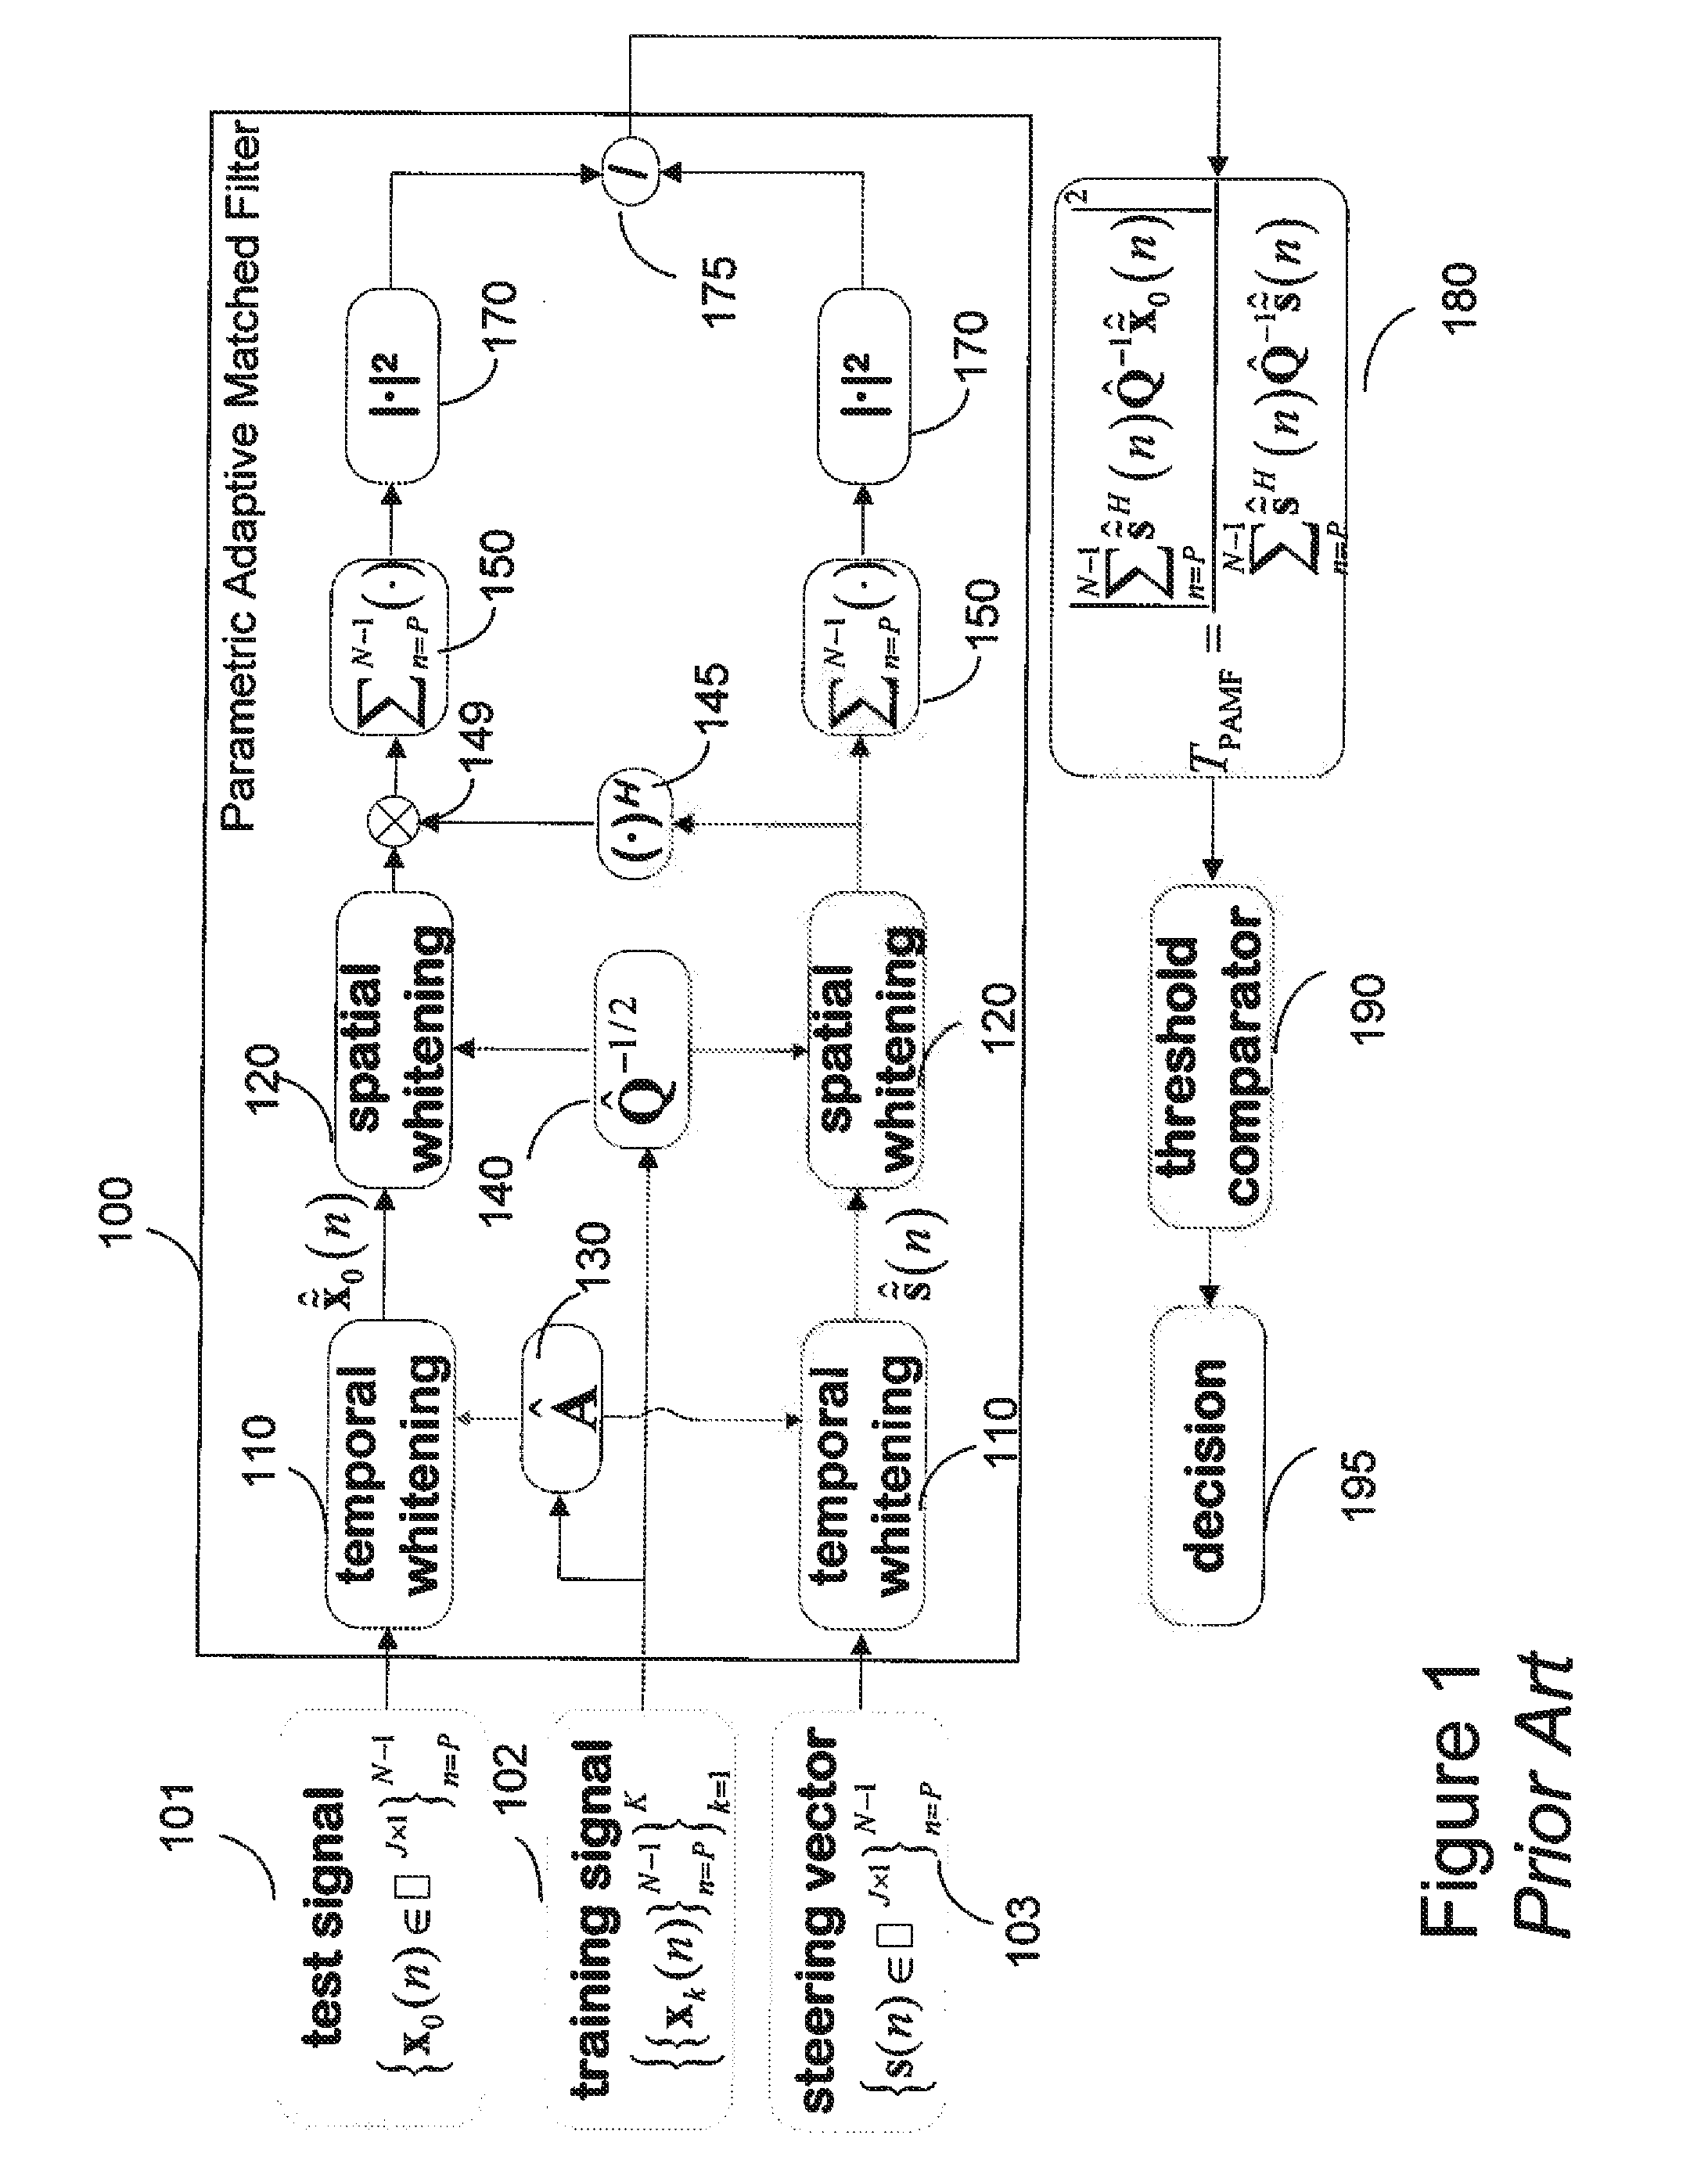 Persymmetric Parametric Adaptive Matched Filters for Detecting Targets Using Space-Time Adaptive Processing of Radar Signals